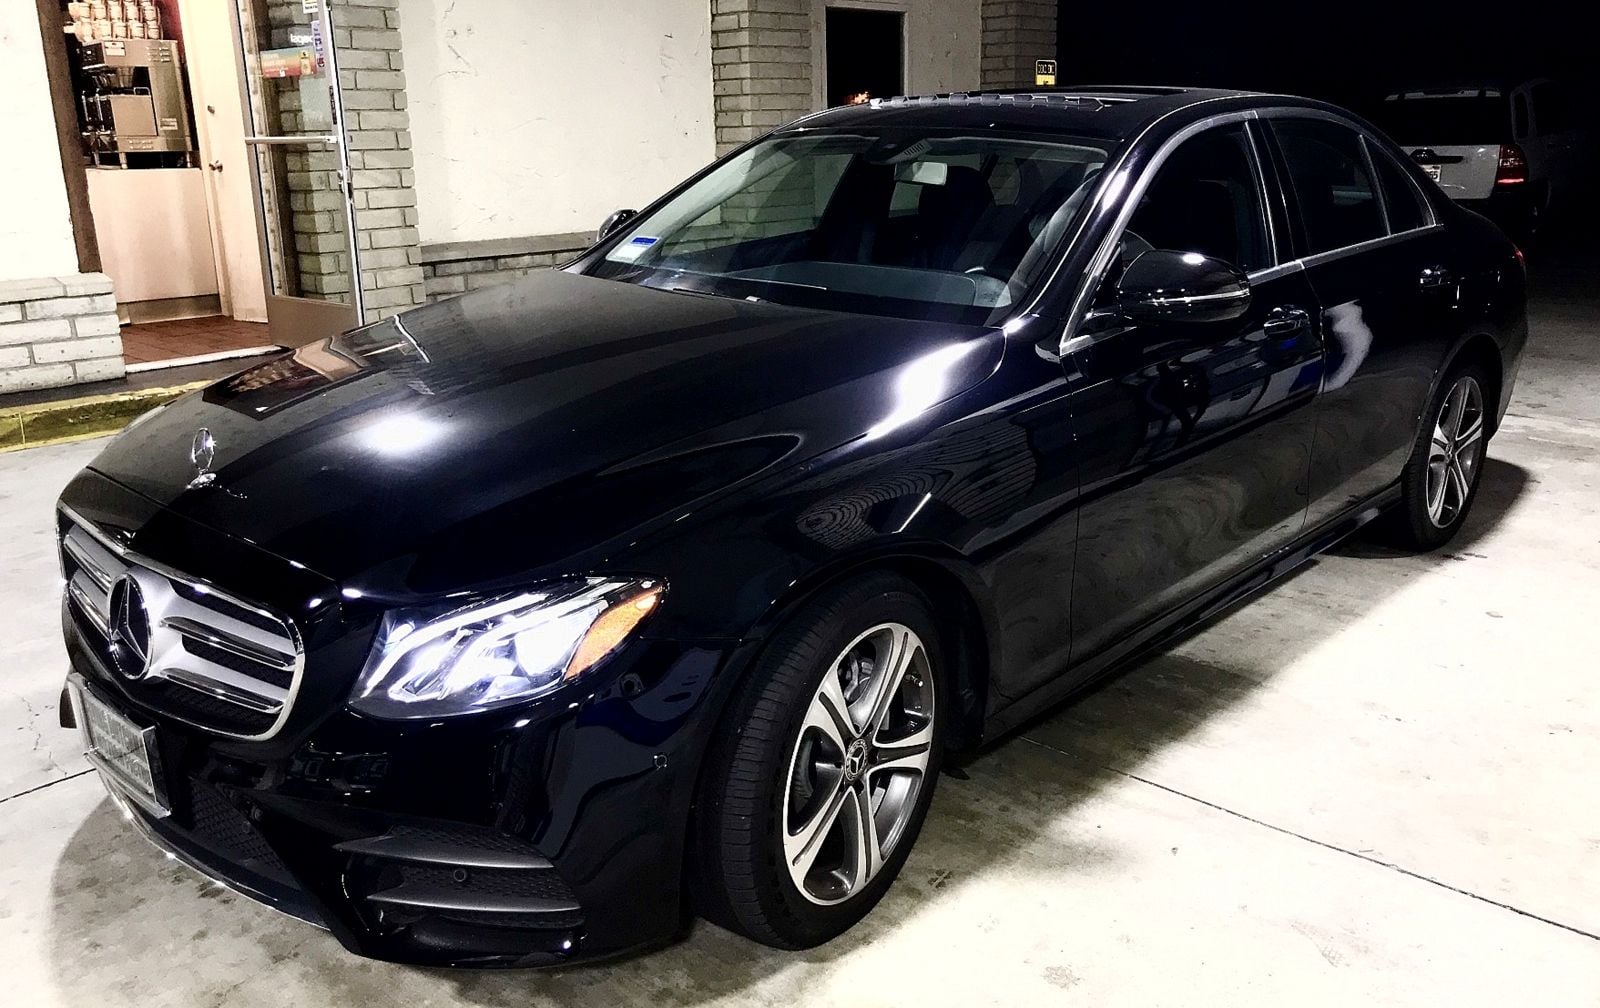 2018 Mercedes-Benz E300 - 2018 MERCEDES BENZ E300 LEASE TAKEOVER, VERY LOW PAYMENT: $566 / MO - Used - VIN WDDZF4JBXJA311109 - 10,200 Miles - 4 cyl - 2WD - Automatic - Sedan - Black - Westlake Village, CA 91361, United States